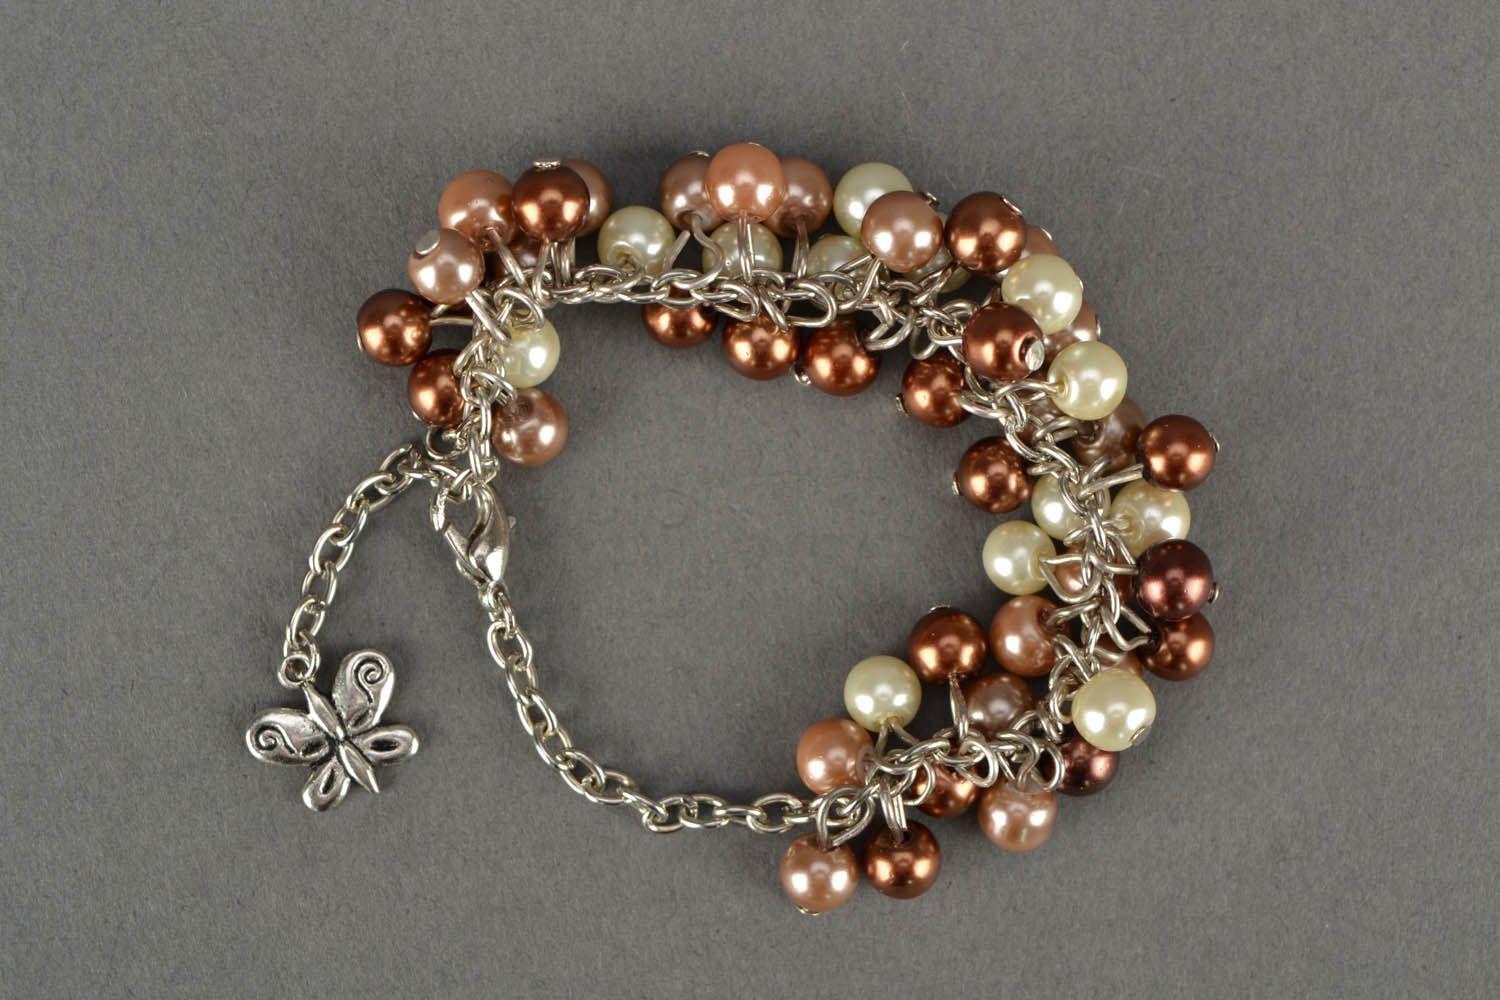 Bracelet made of artificial pearls with charm photo 3